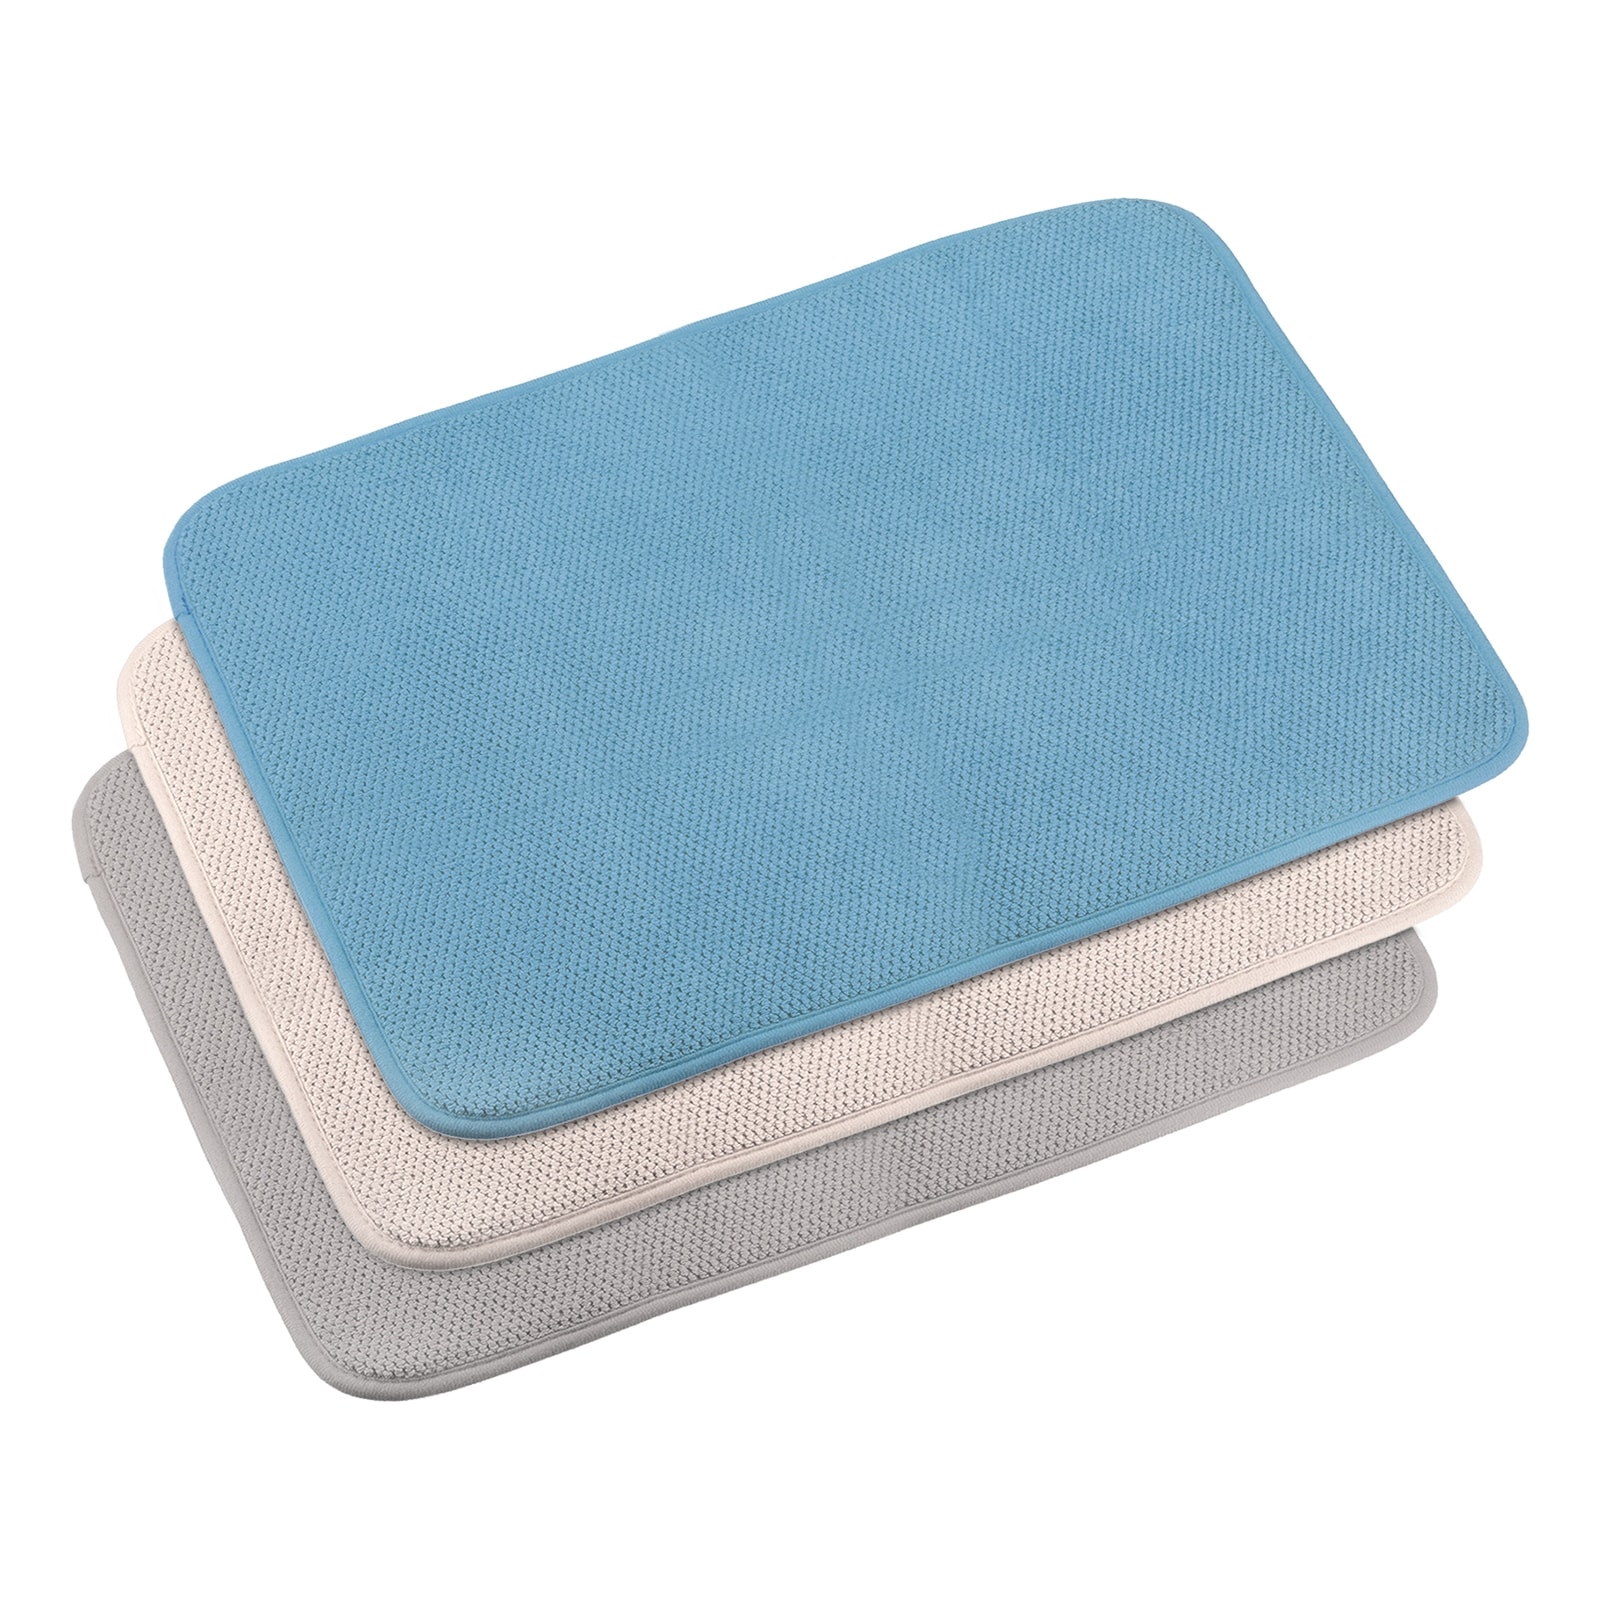 https://ak1.ostkcdn.com/images/products/is/images/direct/94c3d850e1eb3ecd7d67c5f82a9f750388d6089f/3pcs-Microfiber-Absorbent-Dish-Drying-Mat-for-Countertop-Blue-Grey-Beige.jpg